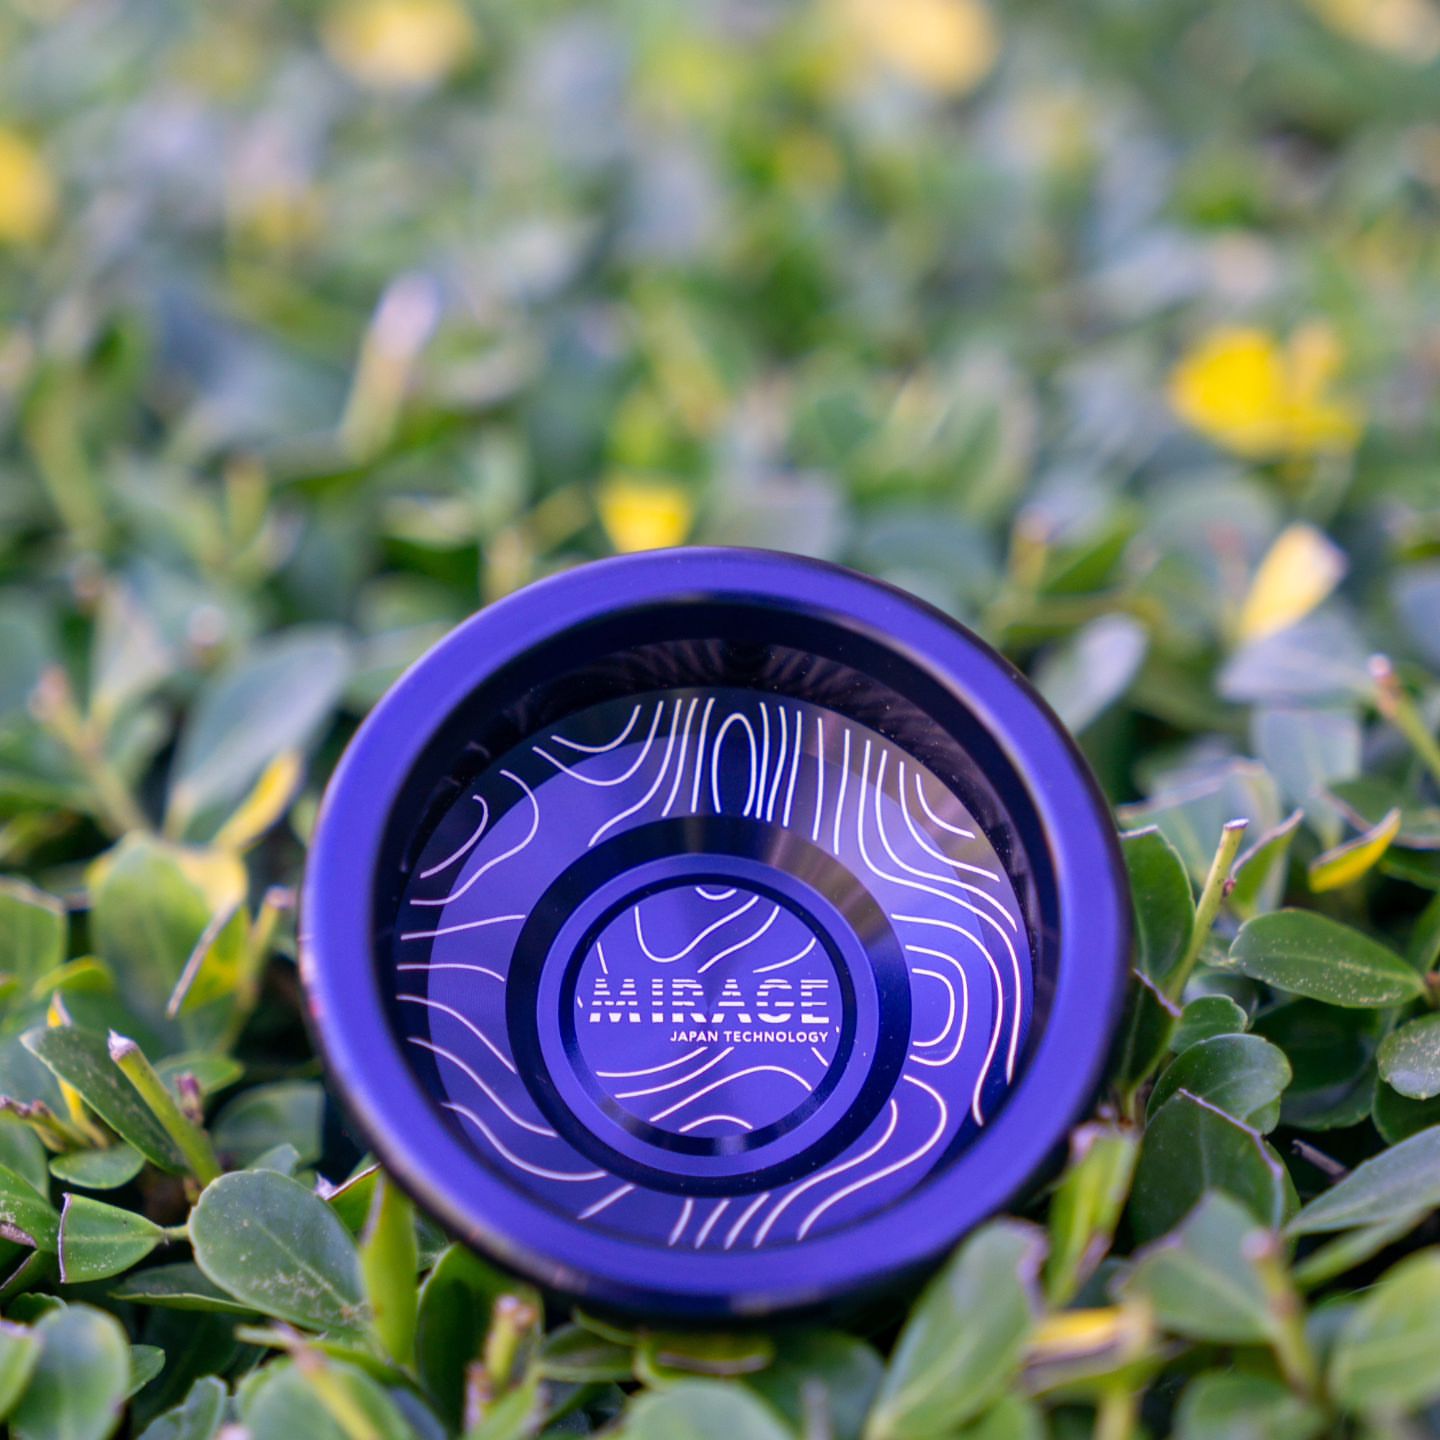 Little obsessed with @japantechnology honestly. 
Mirage 24 is gorgeous 😍 
#todaysthrow #yoyos #yotography #yoyo